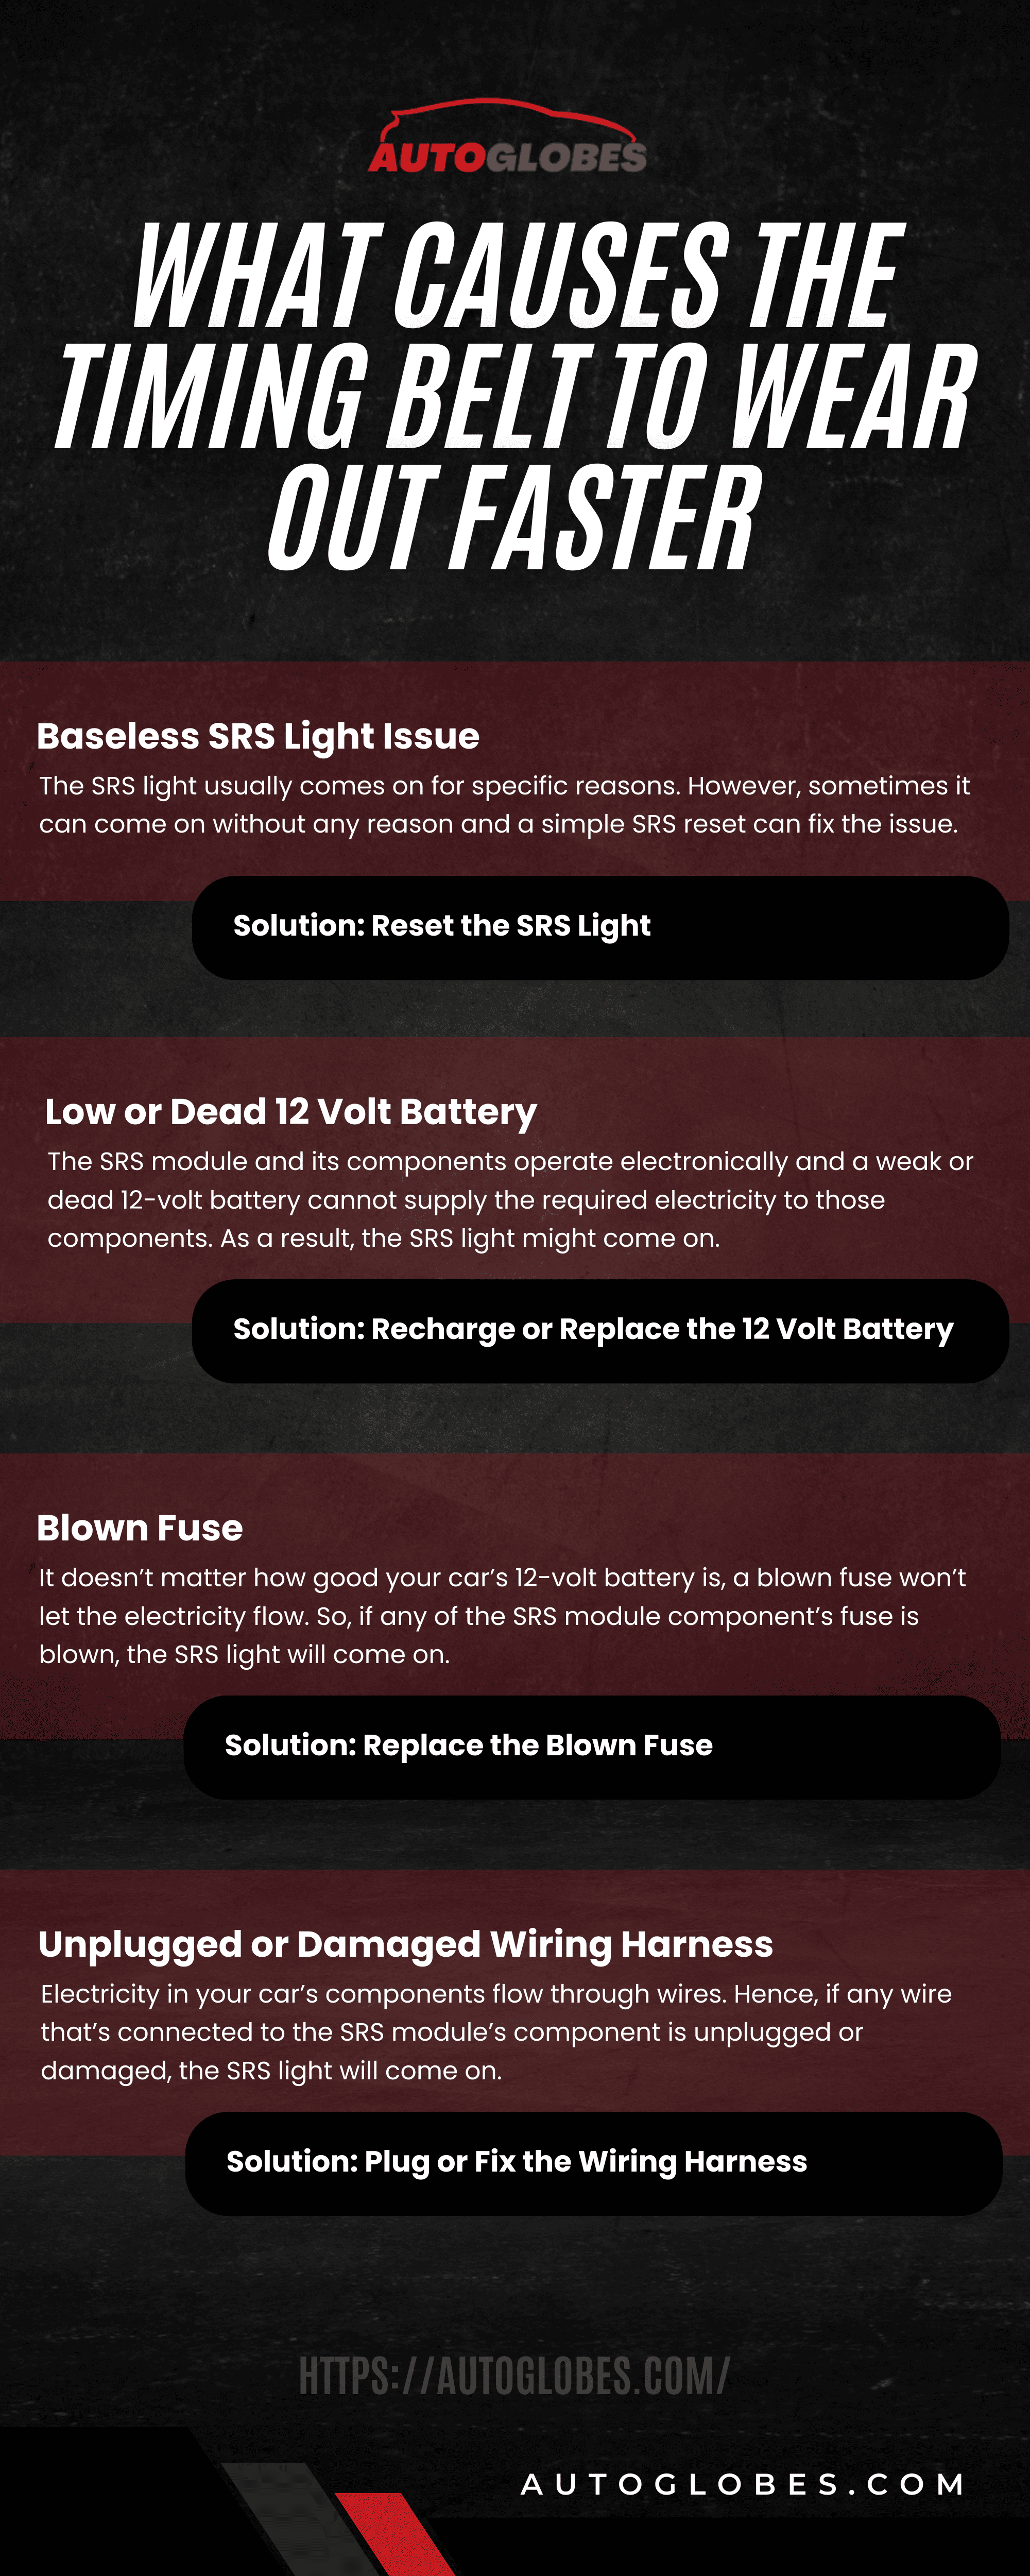 What Causes the Timing Belt to Wear Out Faster Infographic